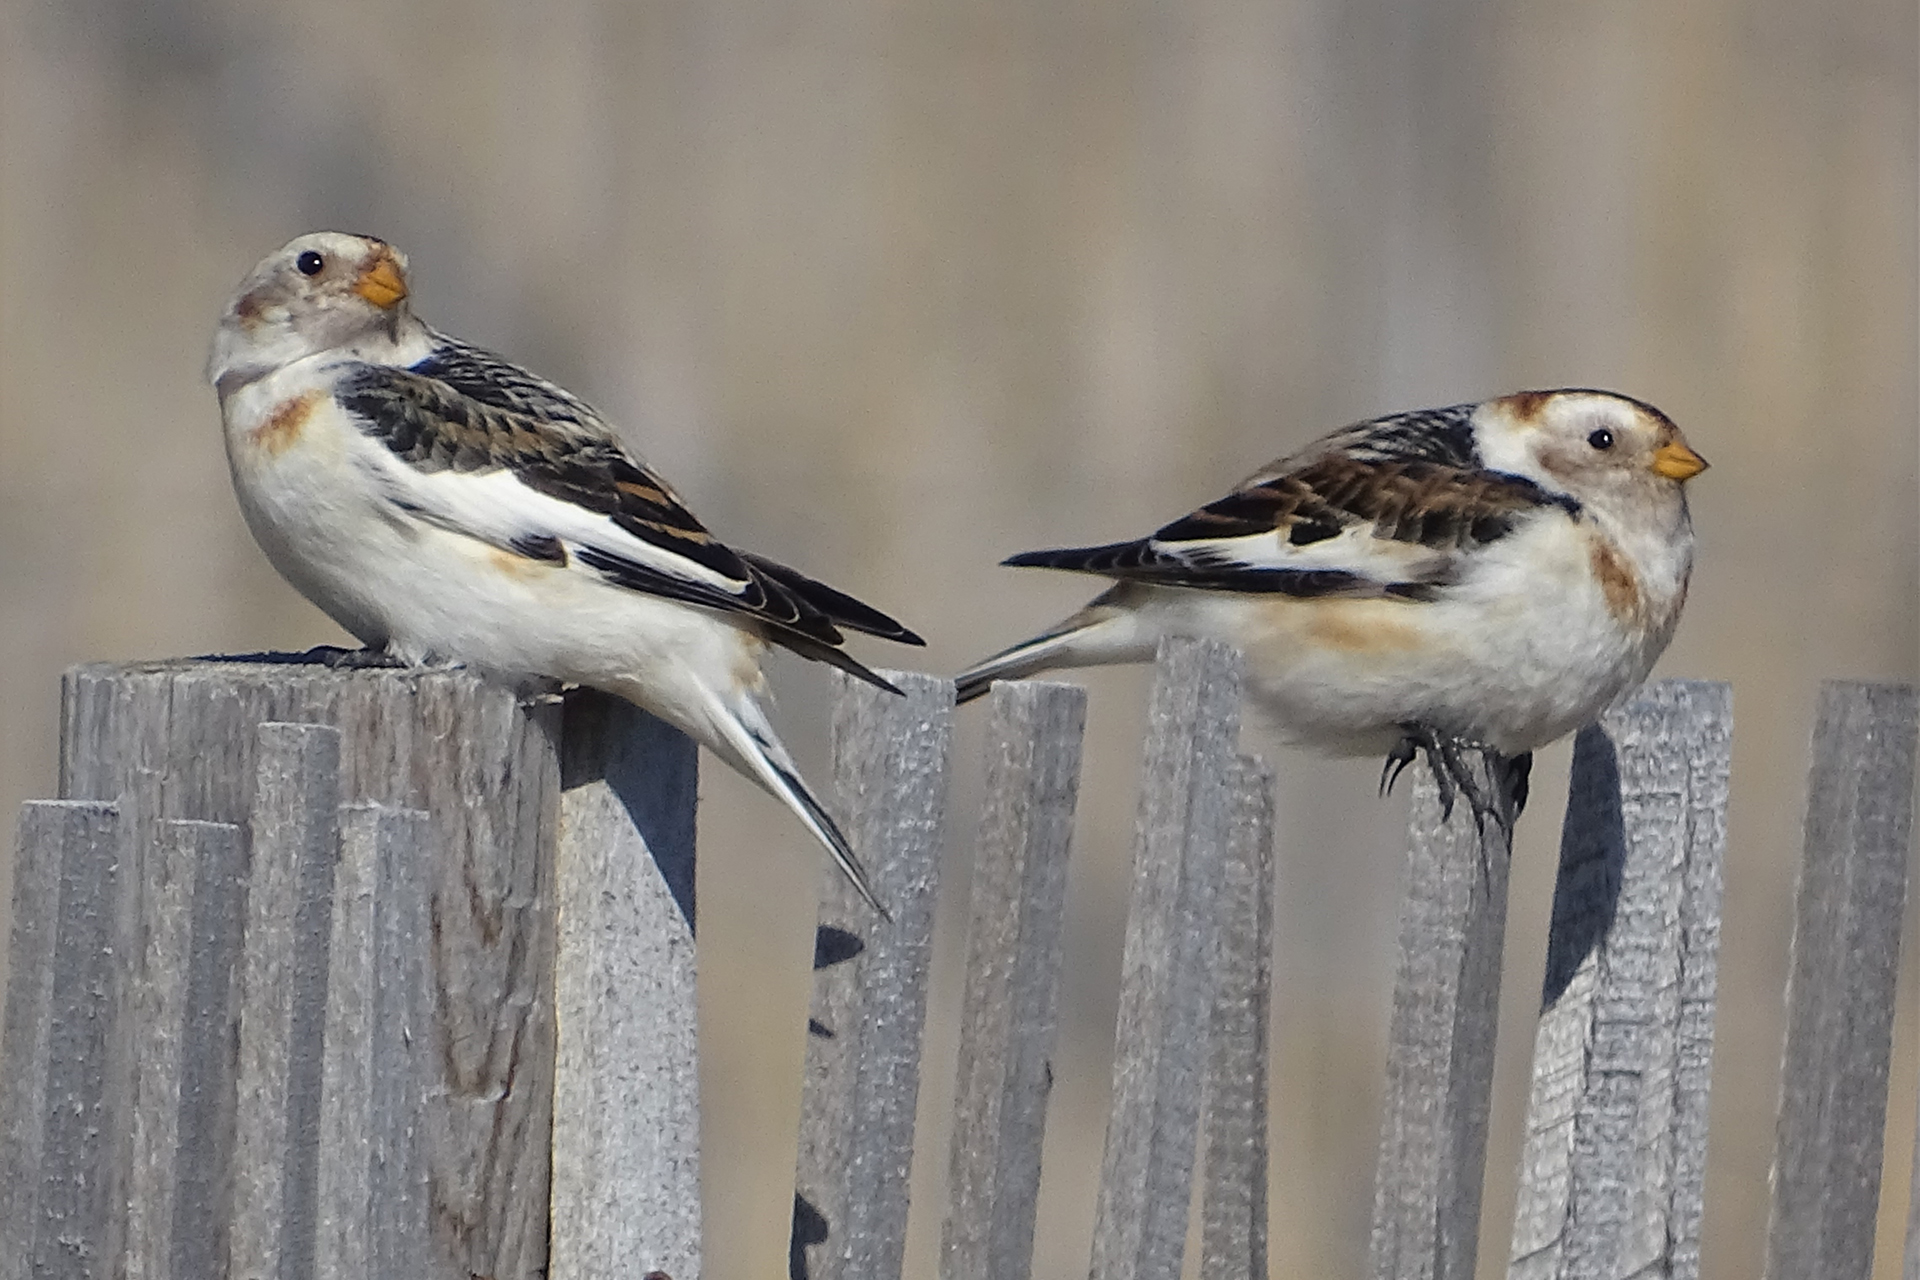 Two snow buntings perched on a wood fence